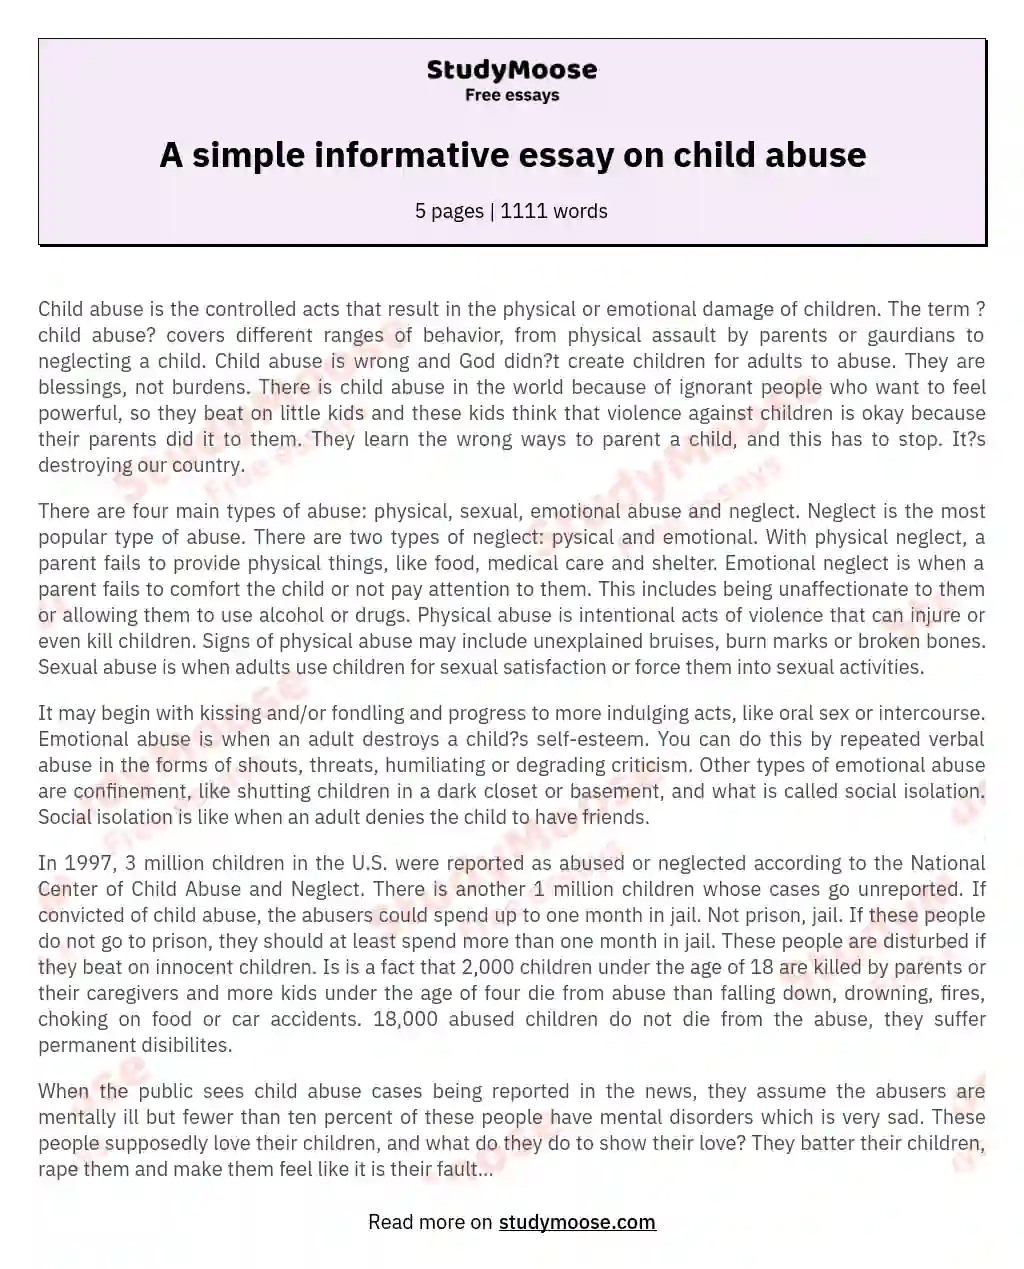 A simple informative essay on child abuse essay